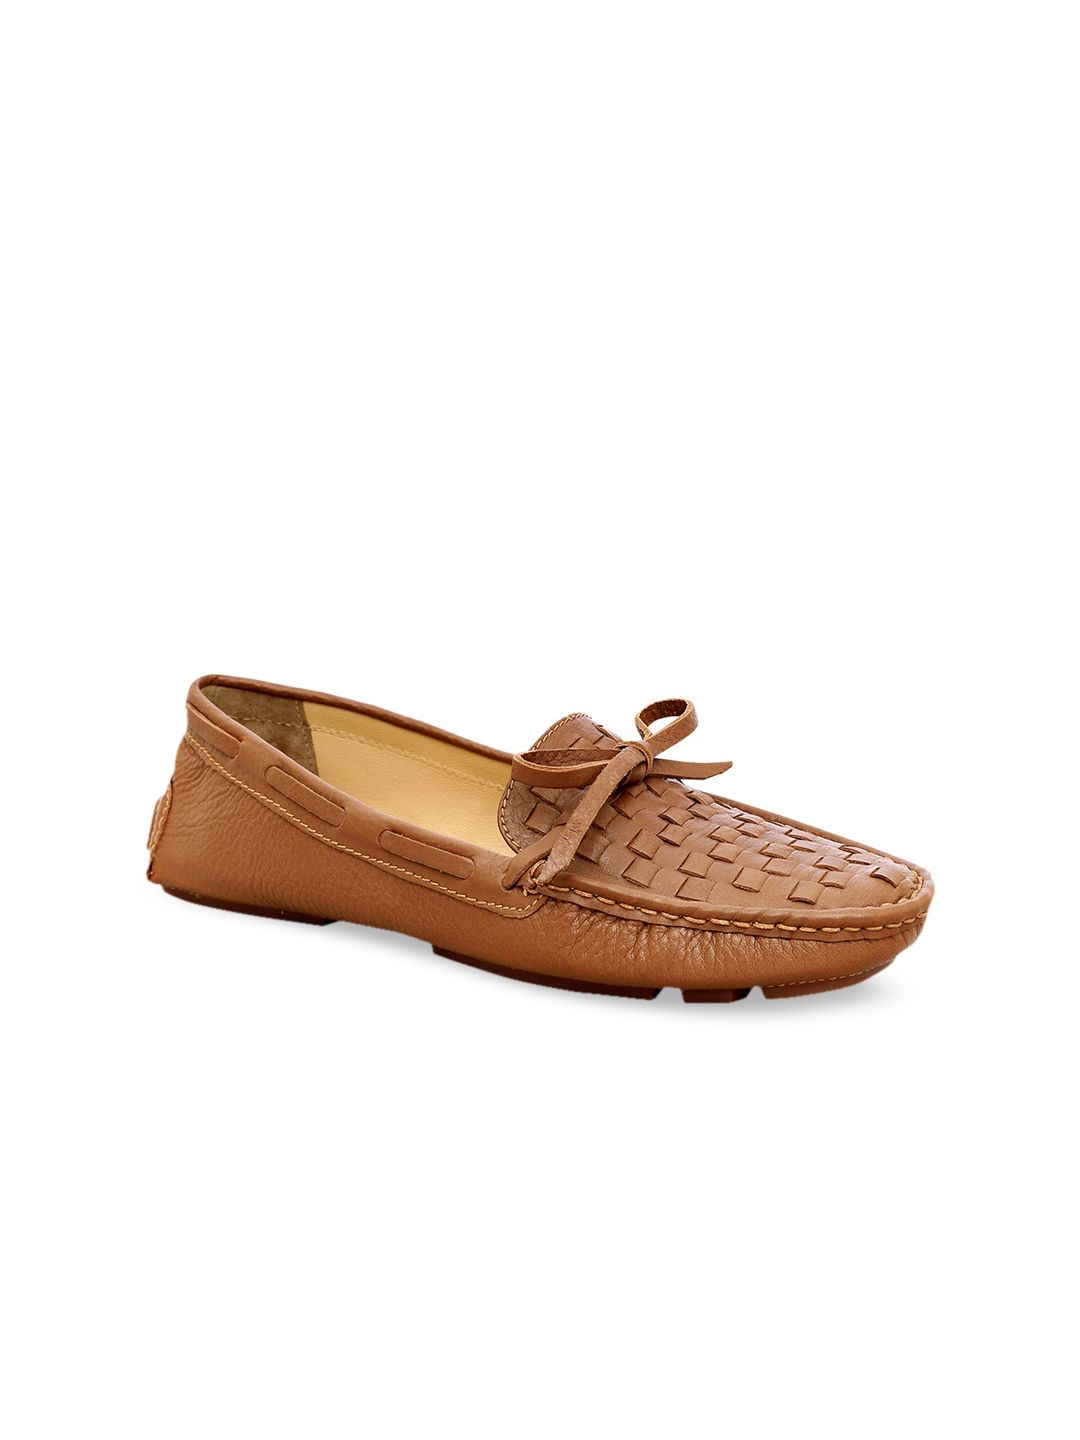 Eske Women Tan Woven Design Leather Driving Shoes Price in India